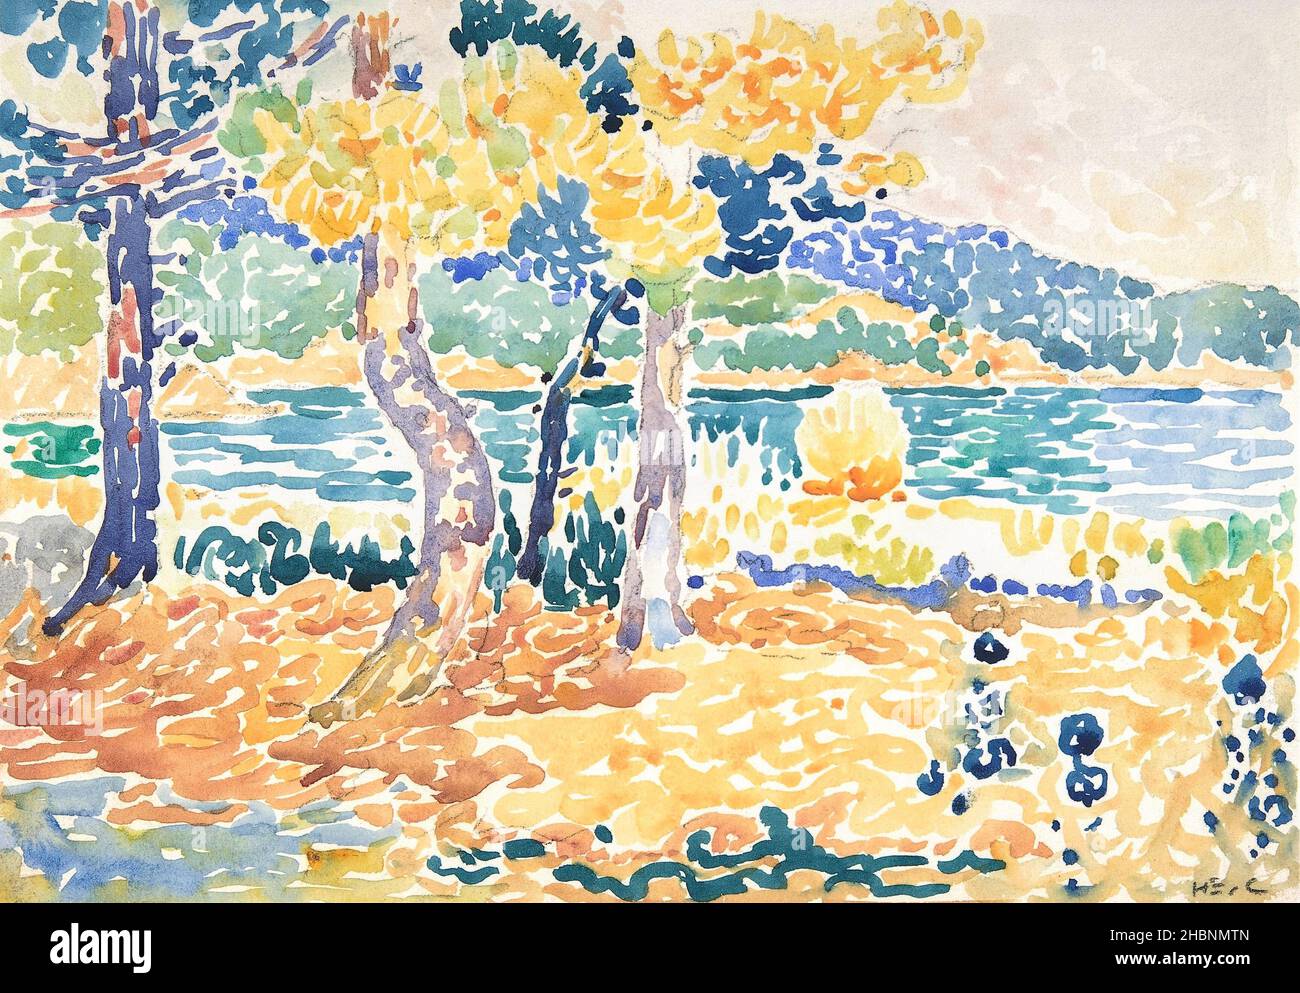 Pines on the Coastline (1856-1910) painting in high resolution by Henri-Edmond Cross. Stock Photo